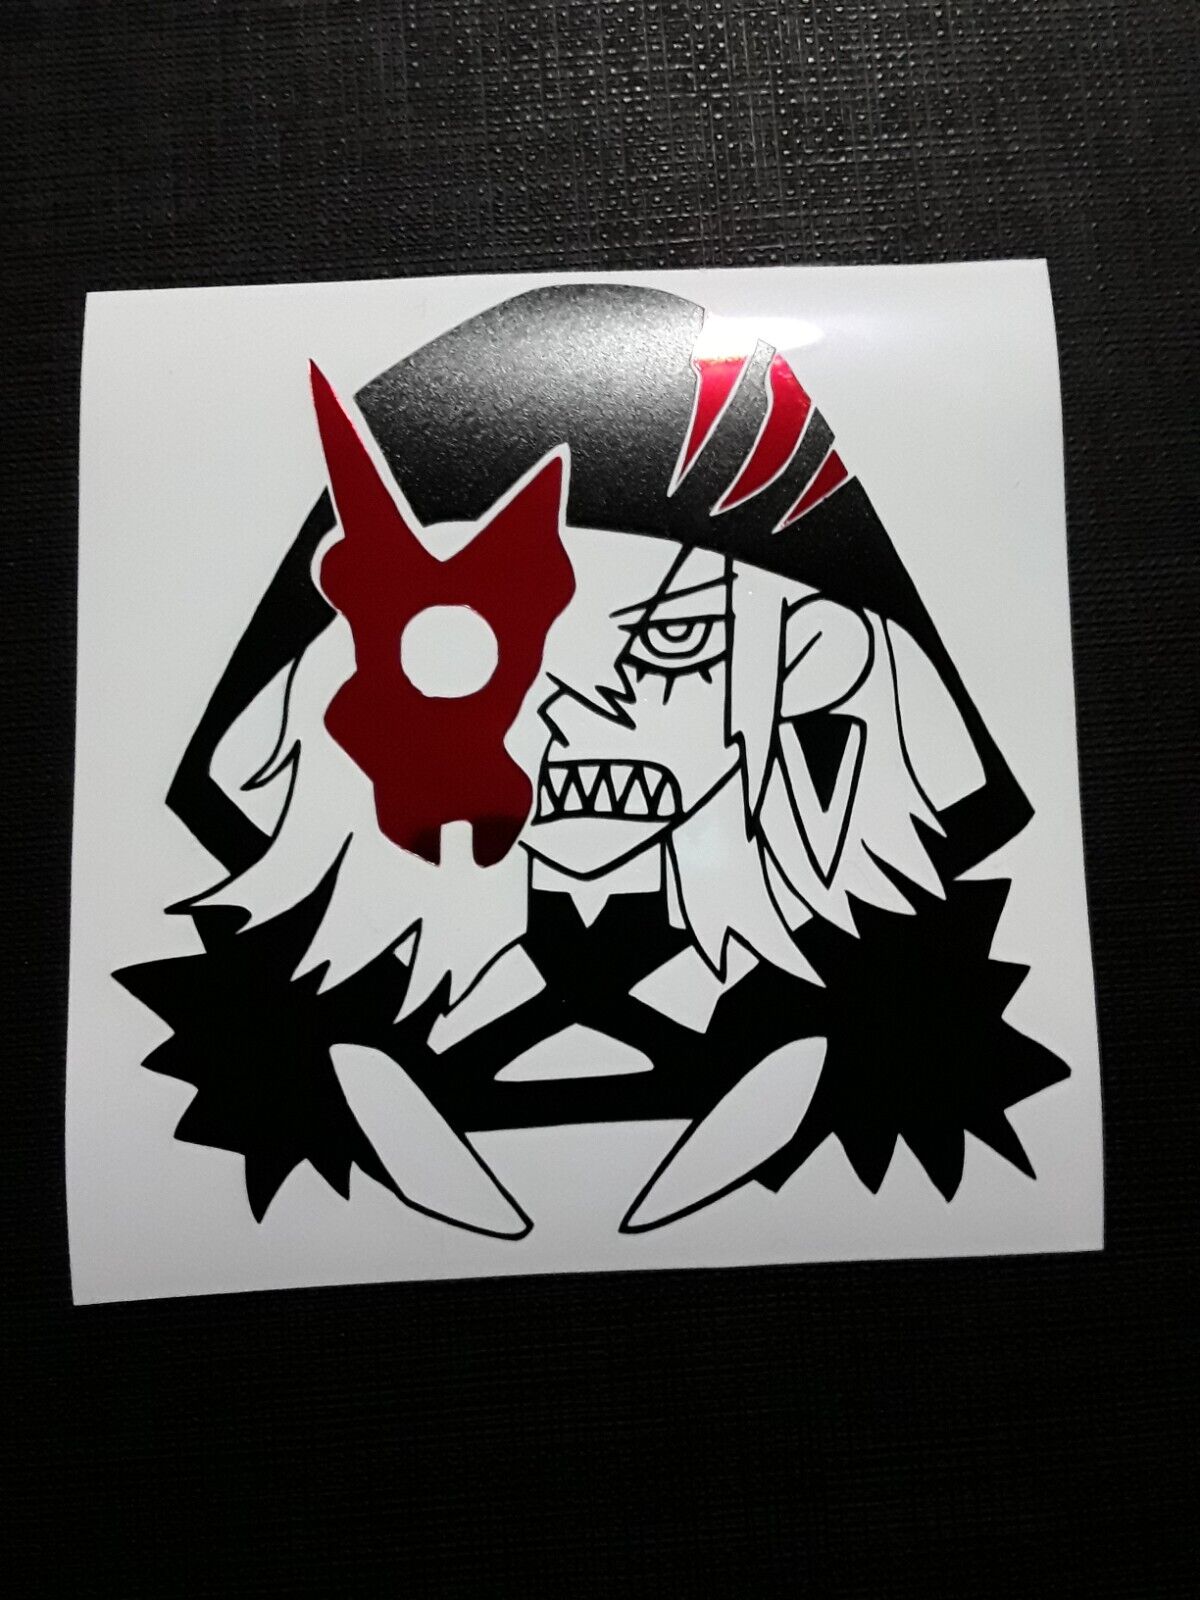 Yugioh Diabellstar the Black Witch WANTED Sticker Holo Vinyl Decal Waterproof